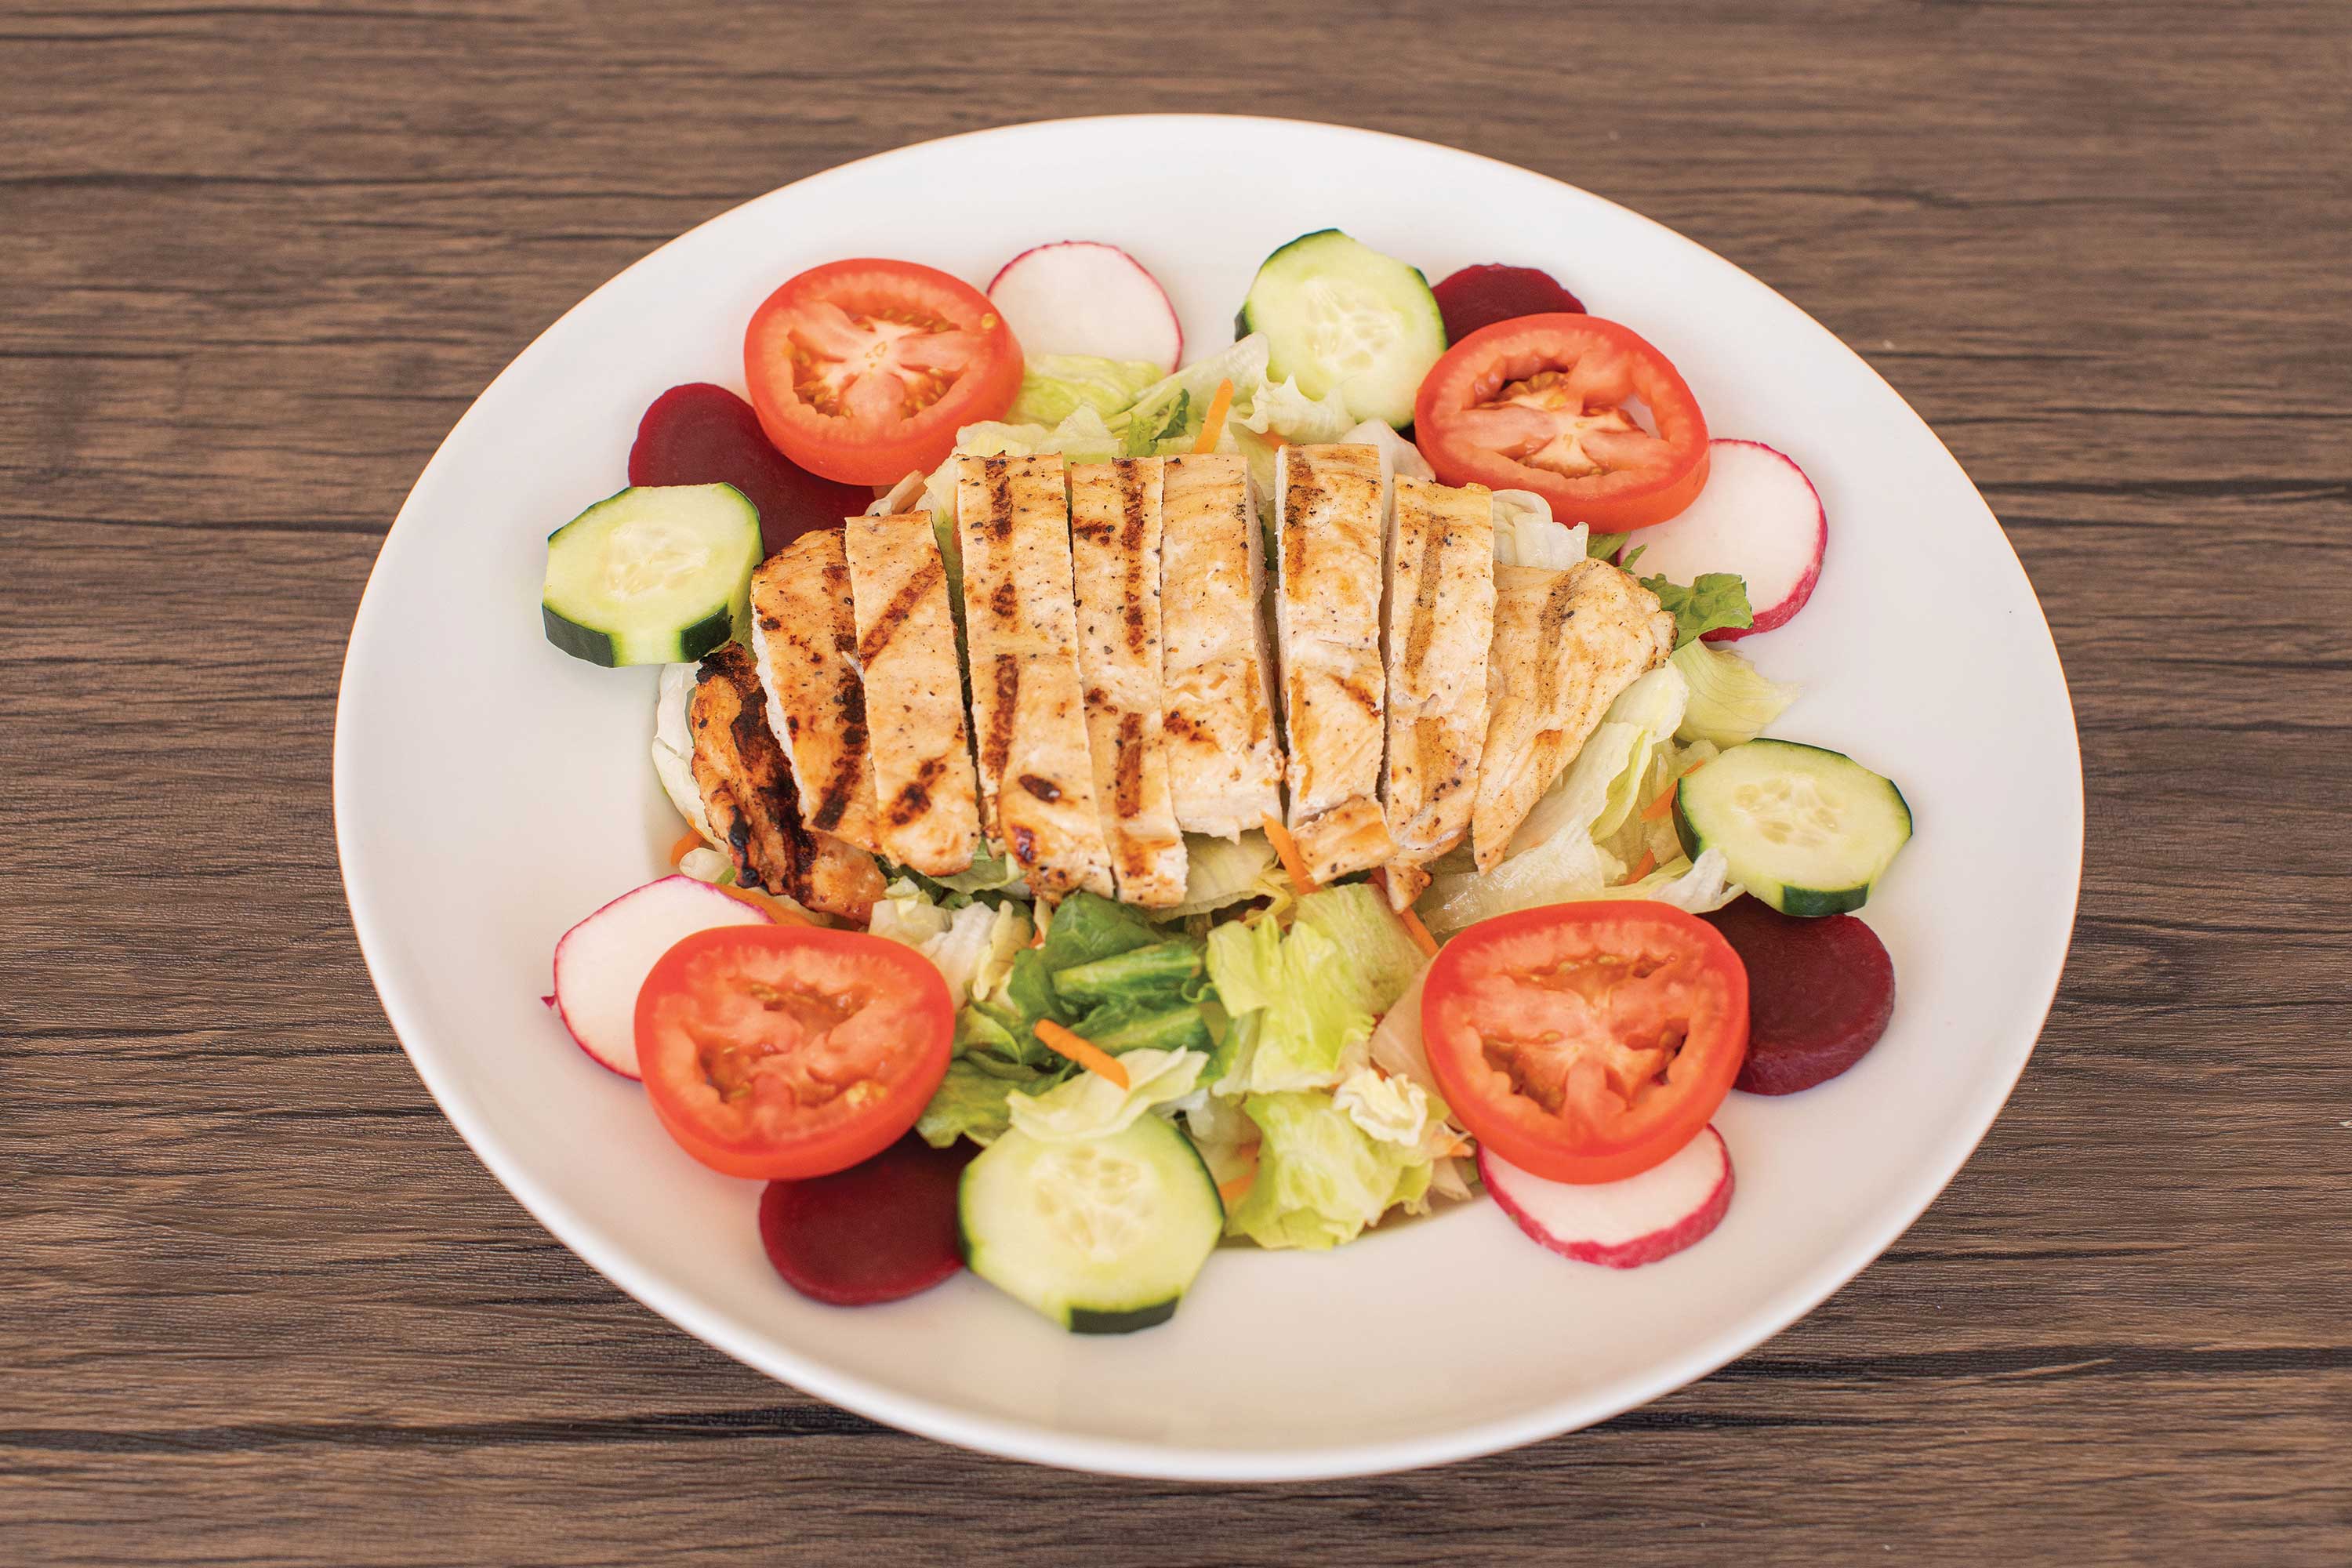 Image: A lettuce and green leaf salad is topped with a sliced chicken breast surrounded with slices of tomato, radish, cucumbers, and beets.